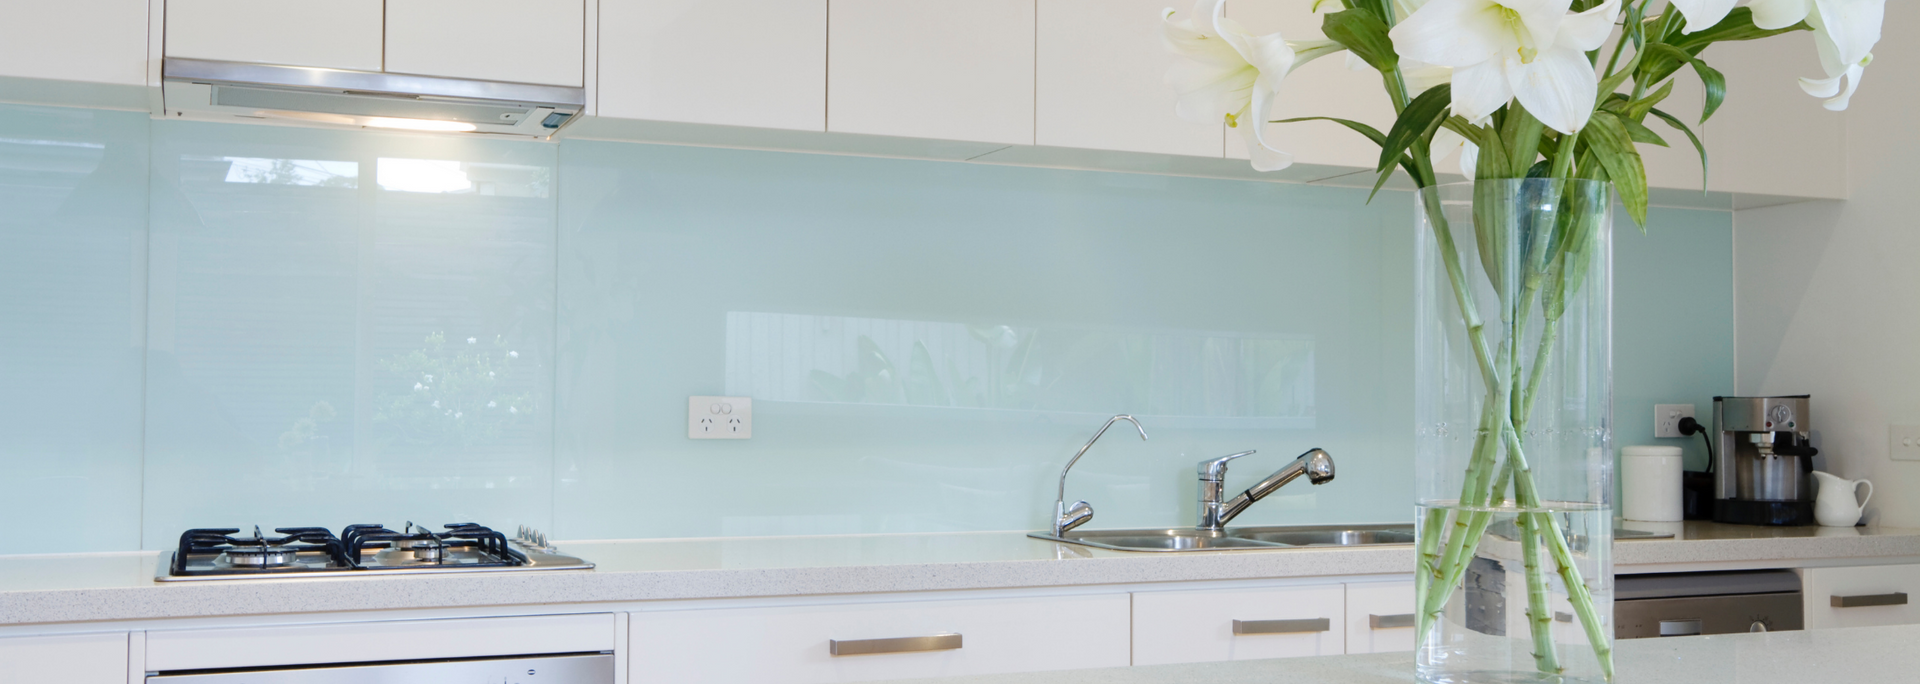 Picture of a glass splashback in a kitchen